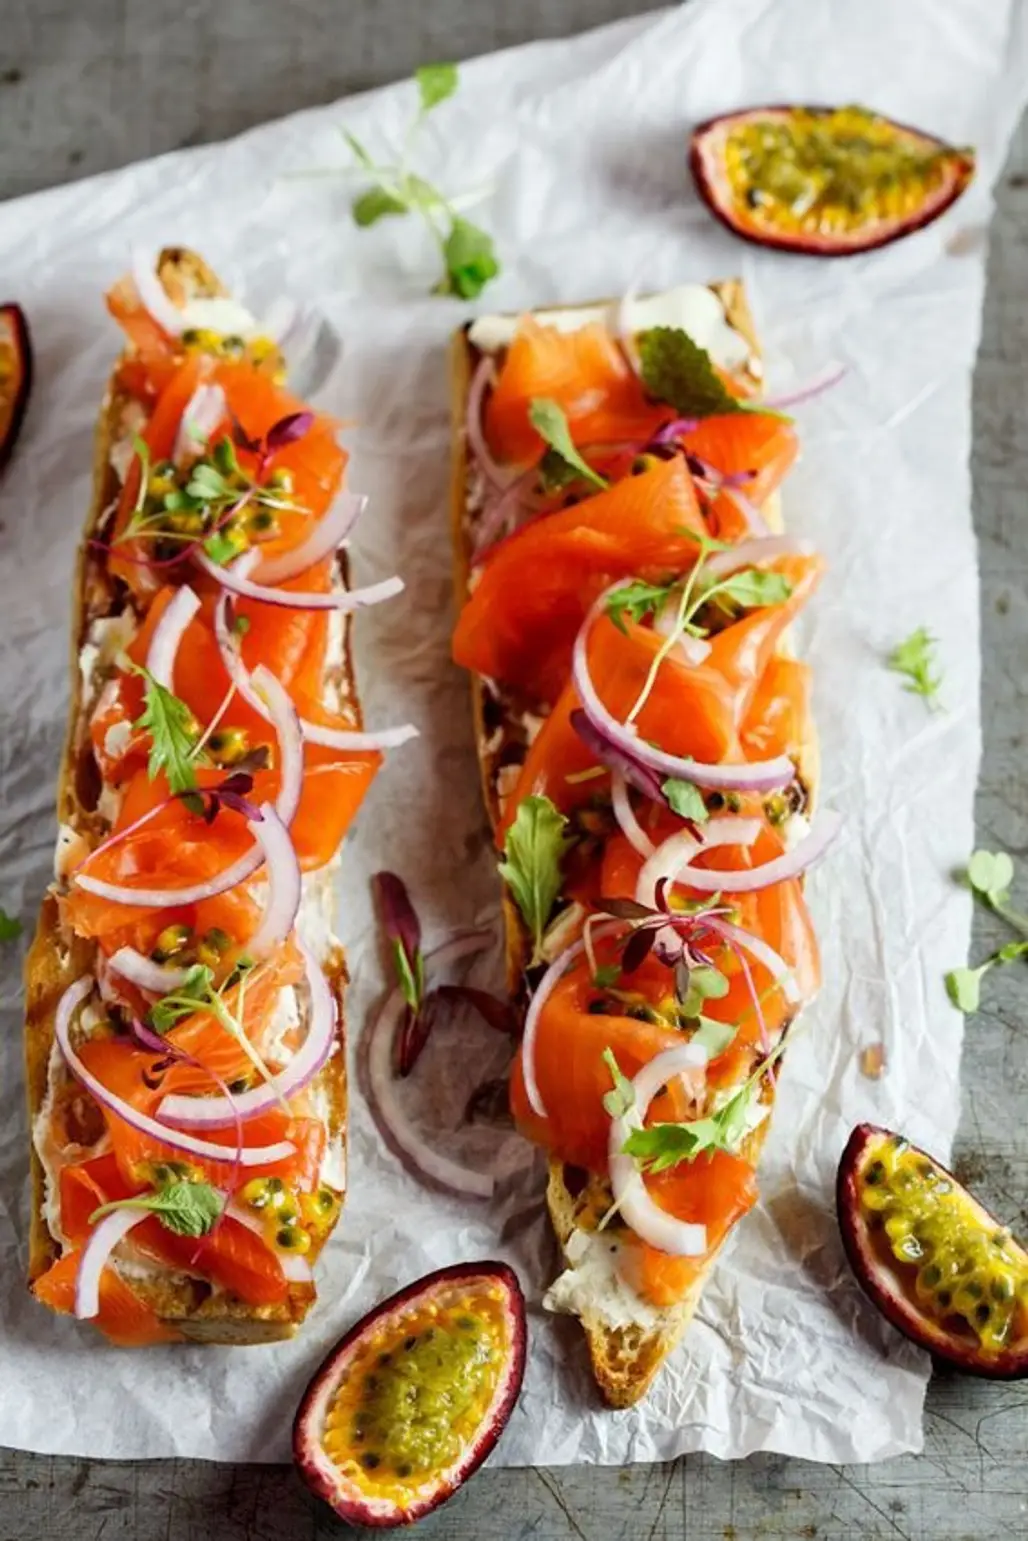 Baguette with Smoked Salmon